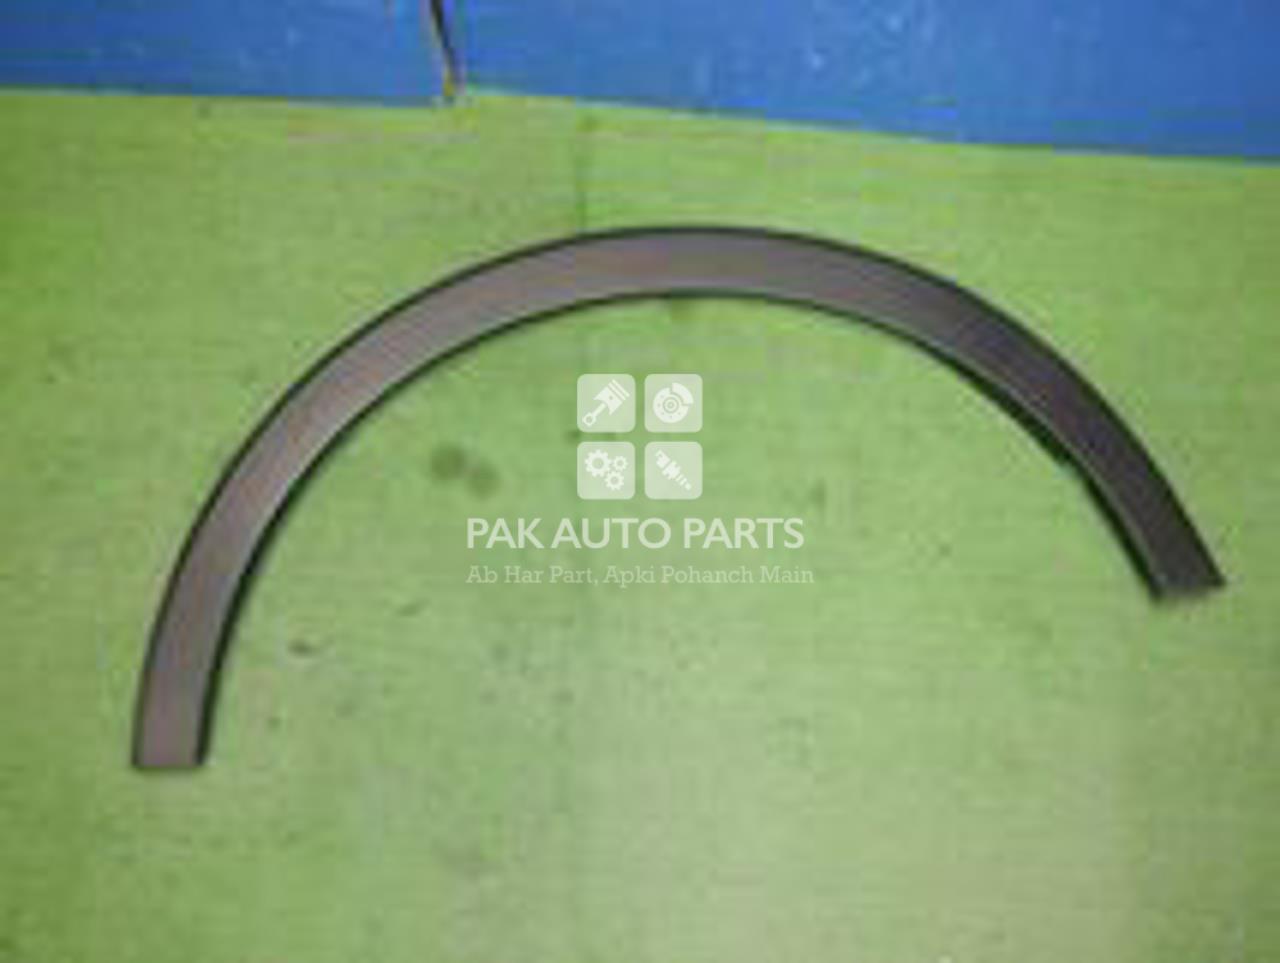 Picture of Toyota Raize Rear Fender Arch